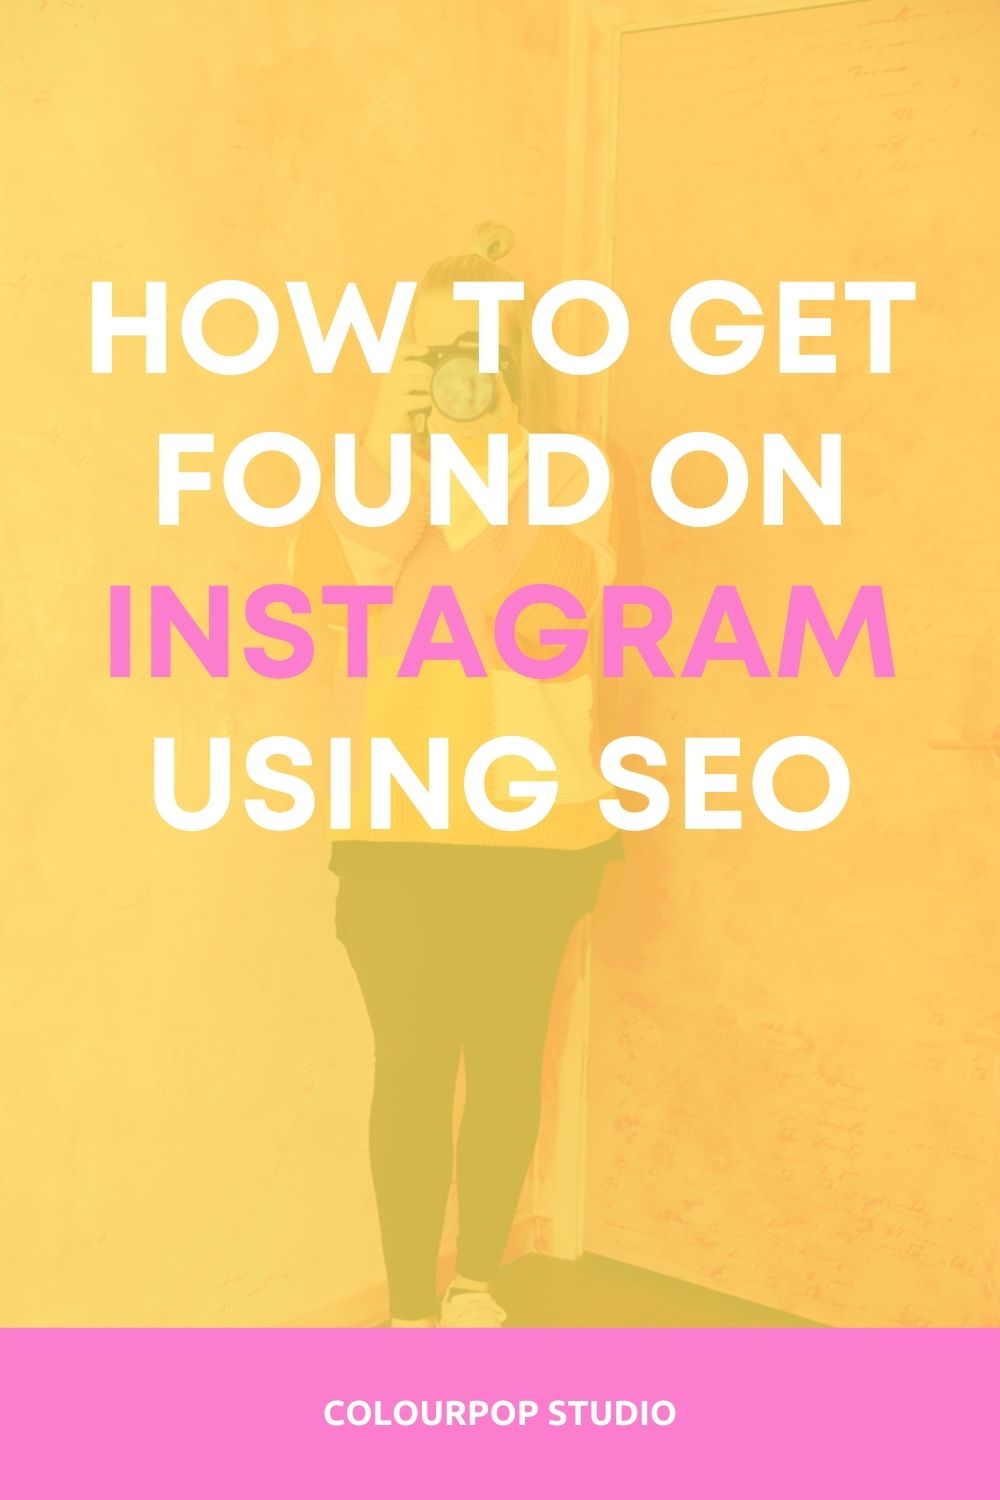 how to get found on instagram using seo by colourpop studio